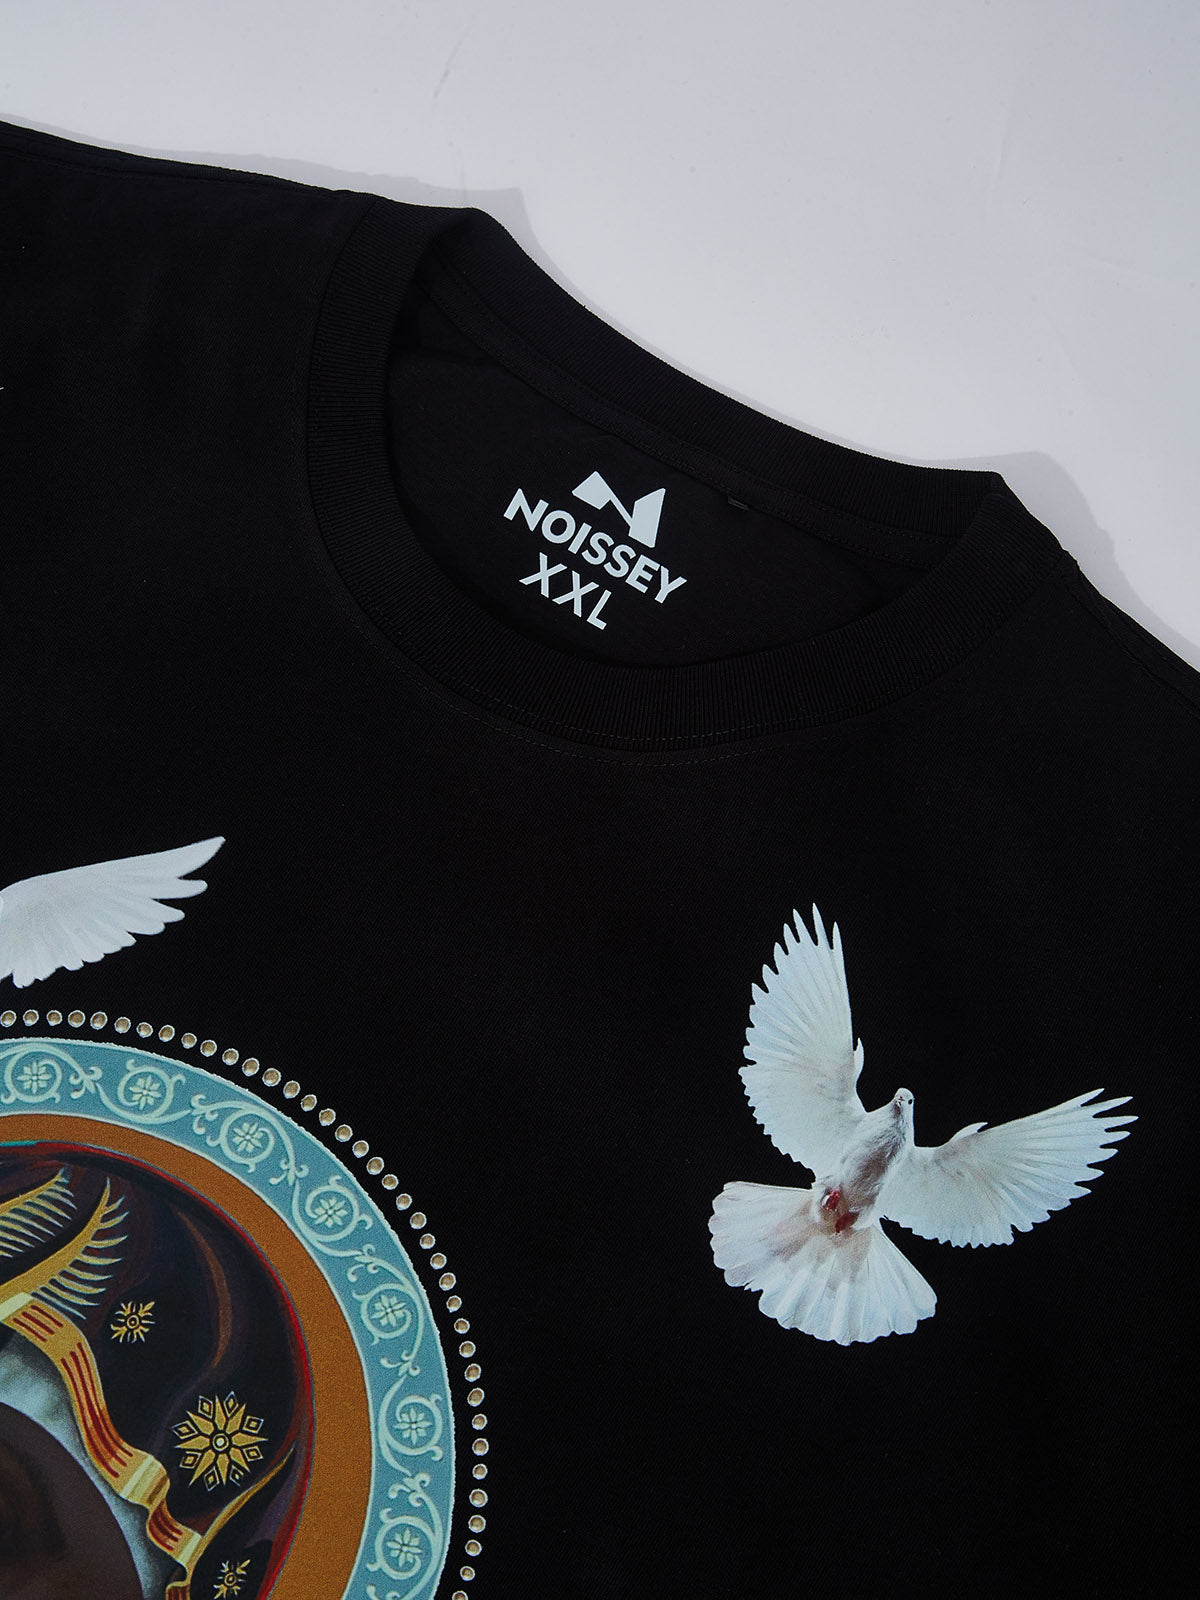 OBSTACLES & DANGERS© Black Madonna and Child T-shirt Available in 6 Colors